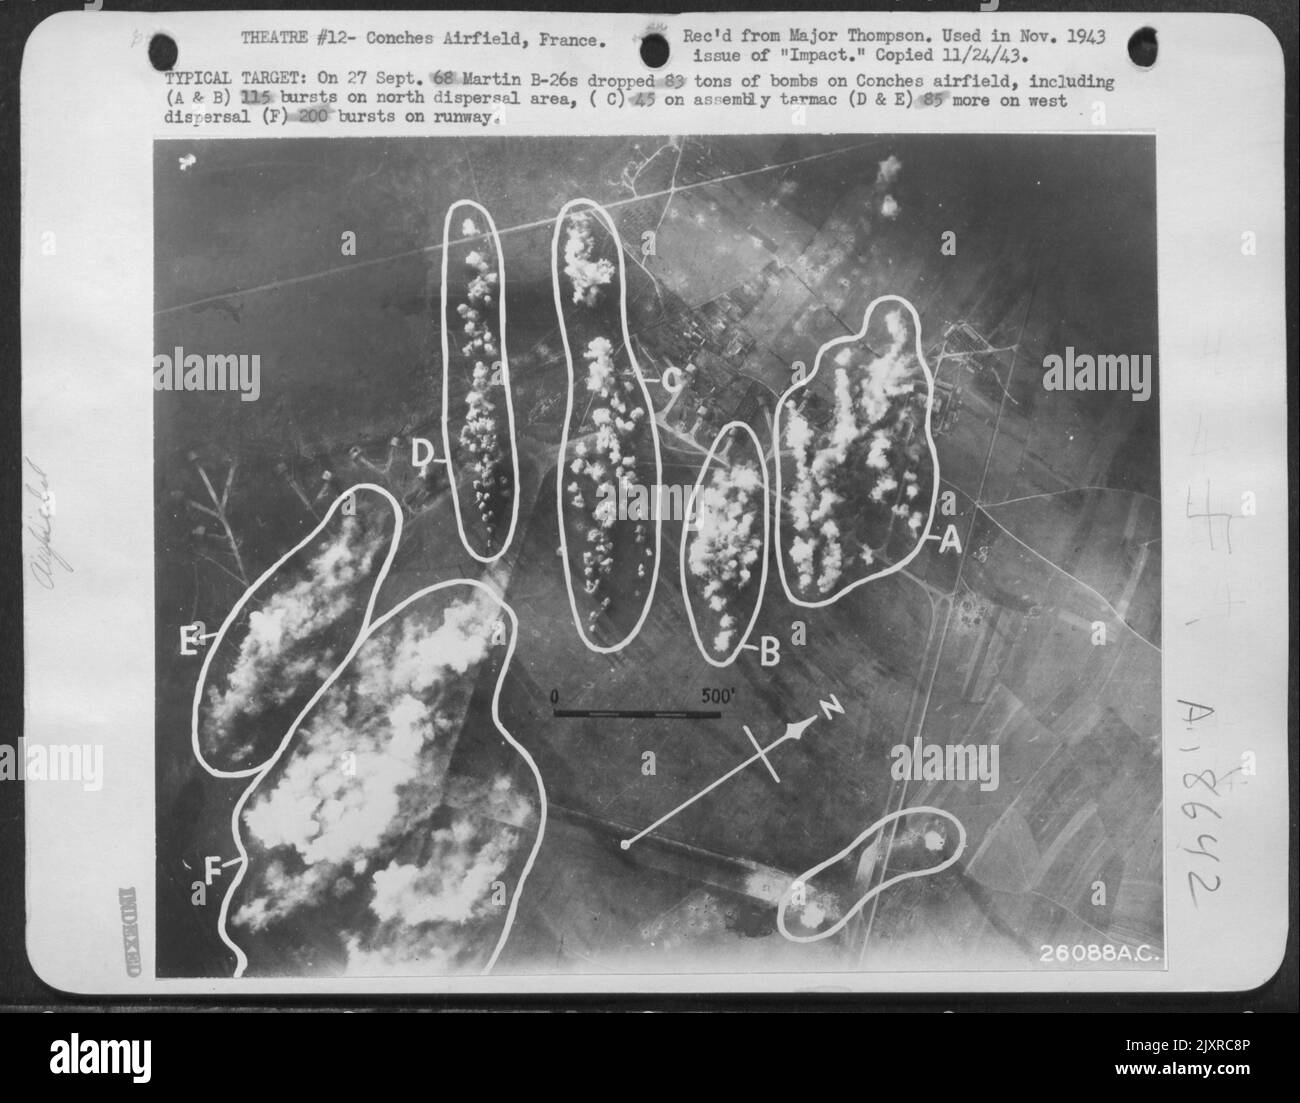 TYPICAL TARGET: On 27 Sept. 68 Martin B-26s dropped 83 tons of bombs on Conches airfield, including (A & B) 115 bursts on north dispersal area, (C) 45 on assembly tarmac (D & E) 85 more on west dispersal (F) 200 bursts on runway. Stock Photo